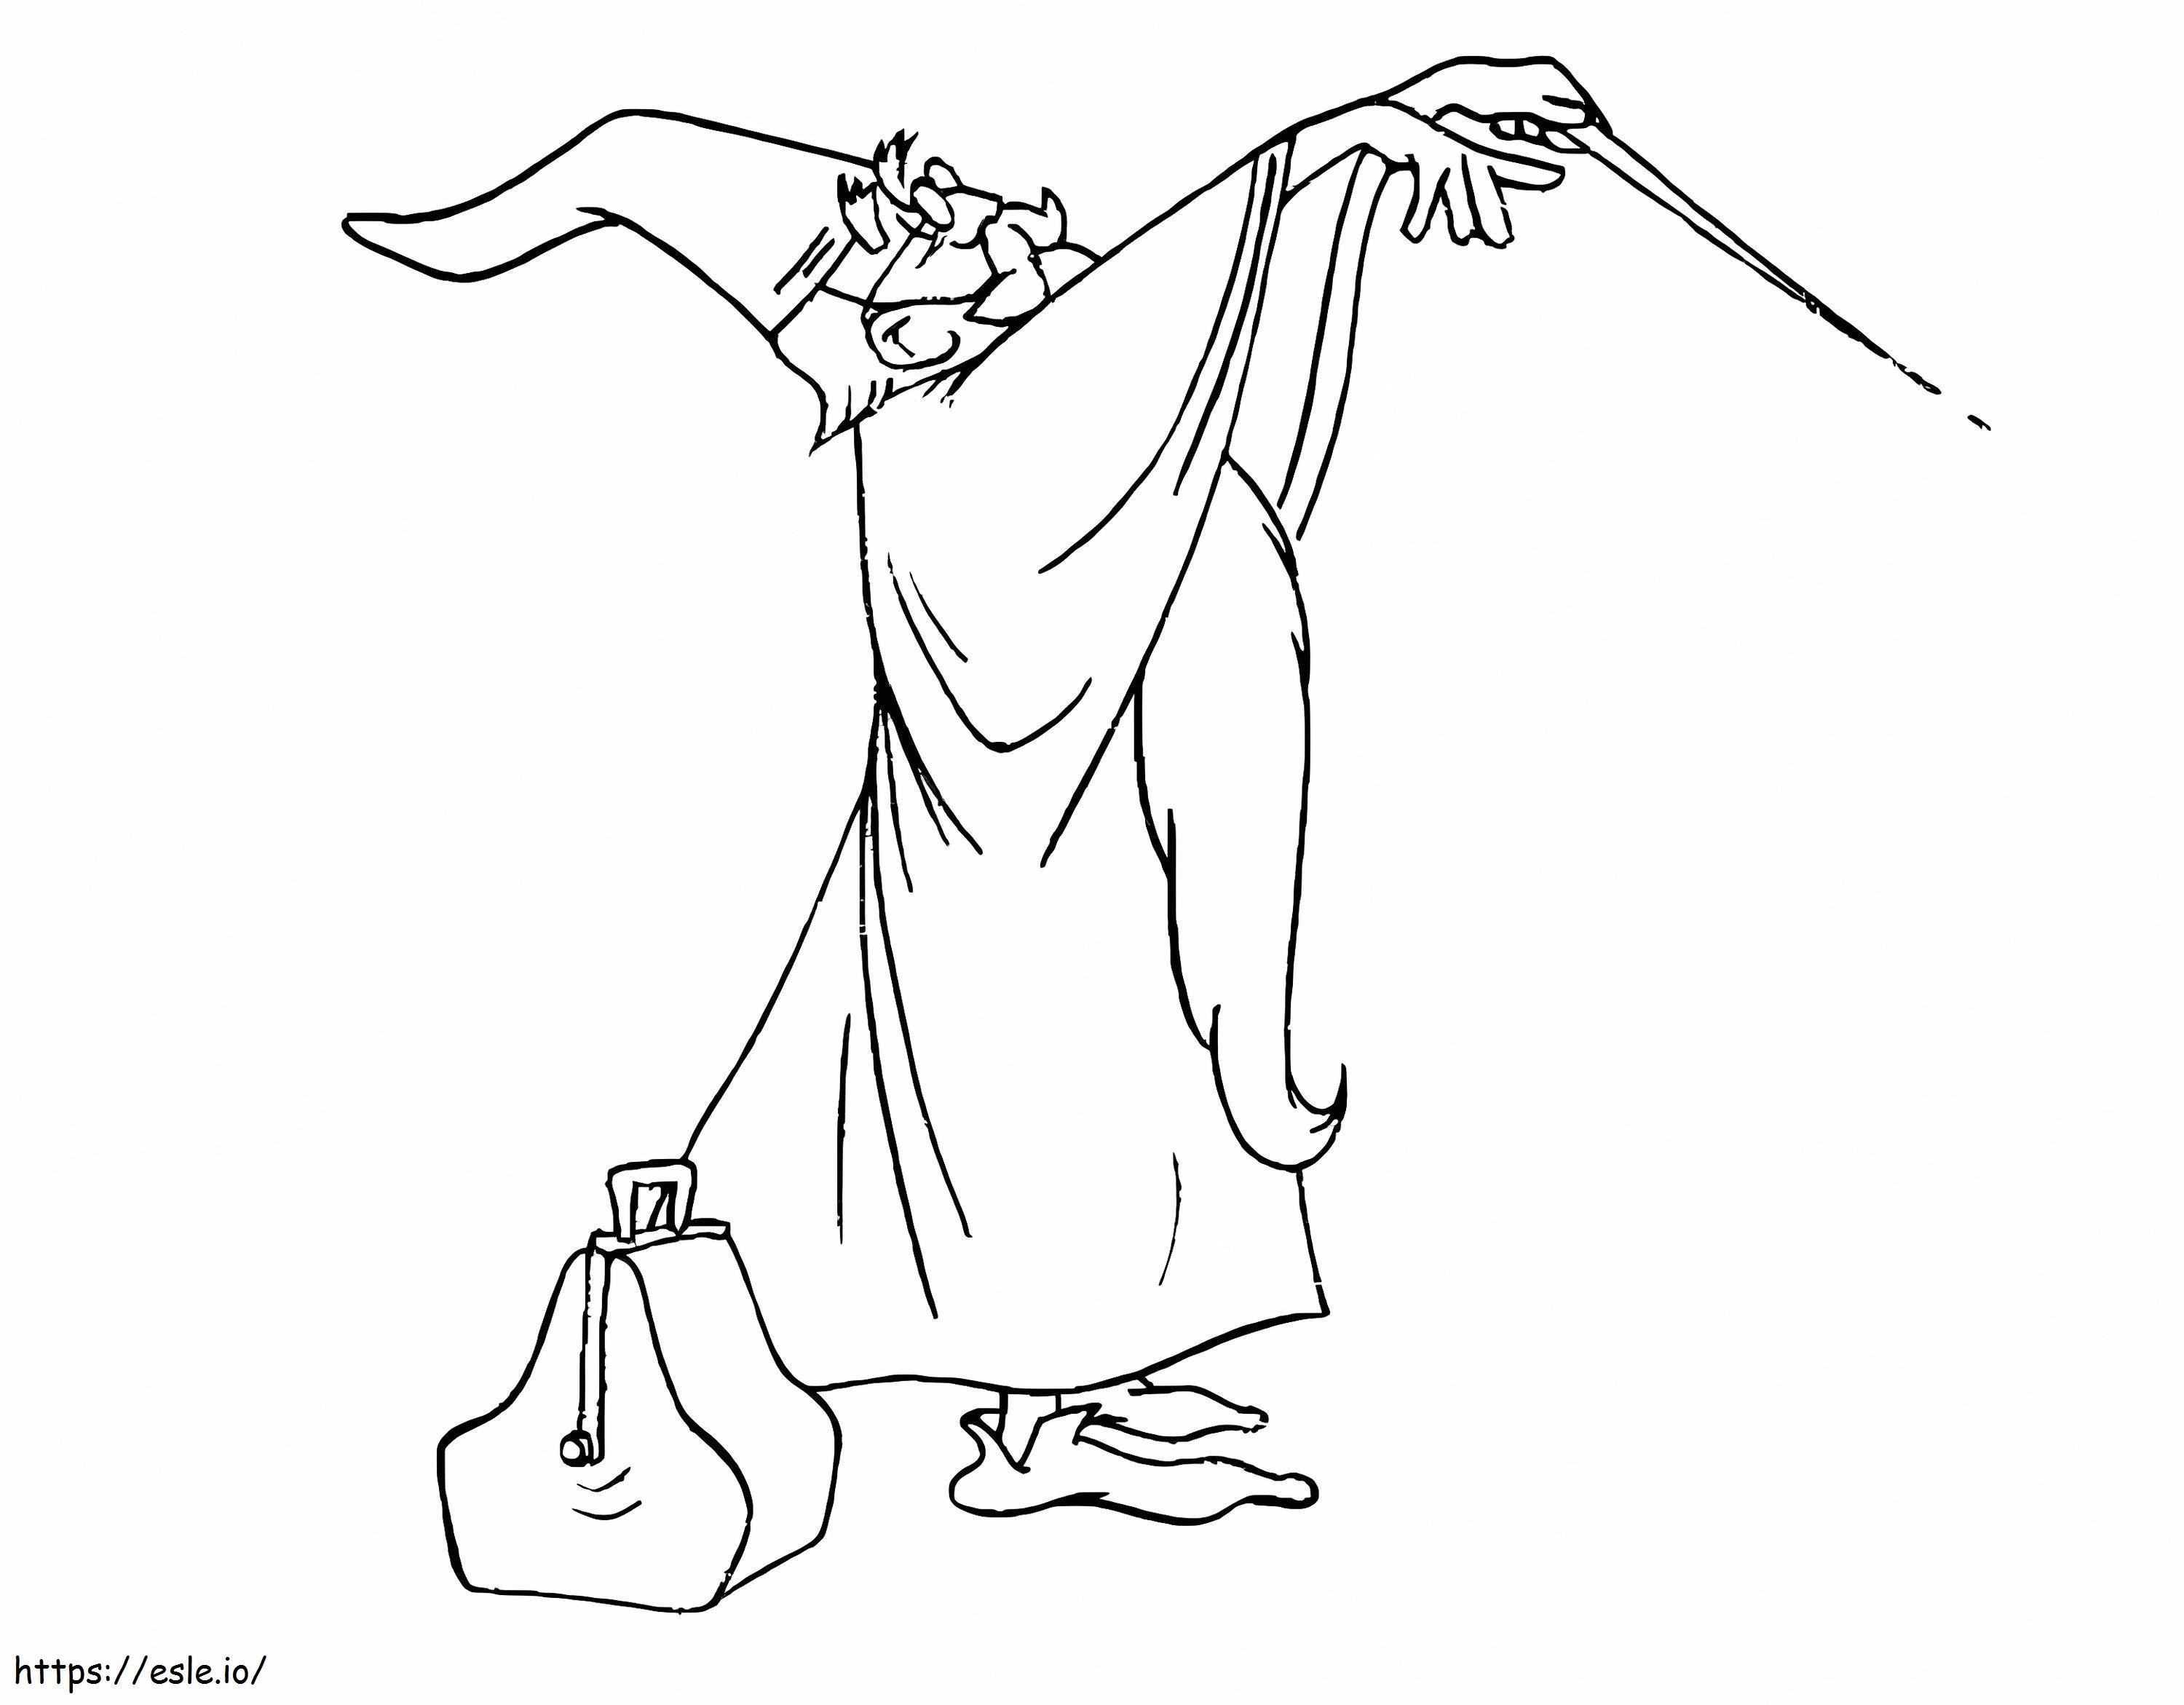 Merlin The Wizard coloring page